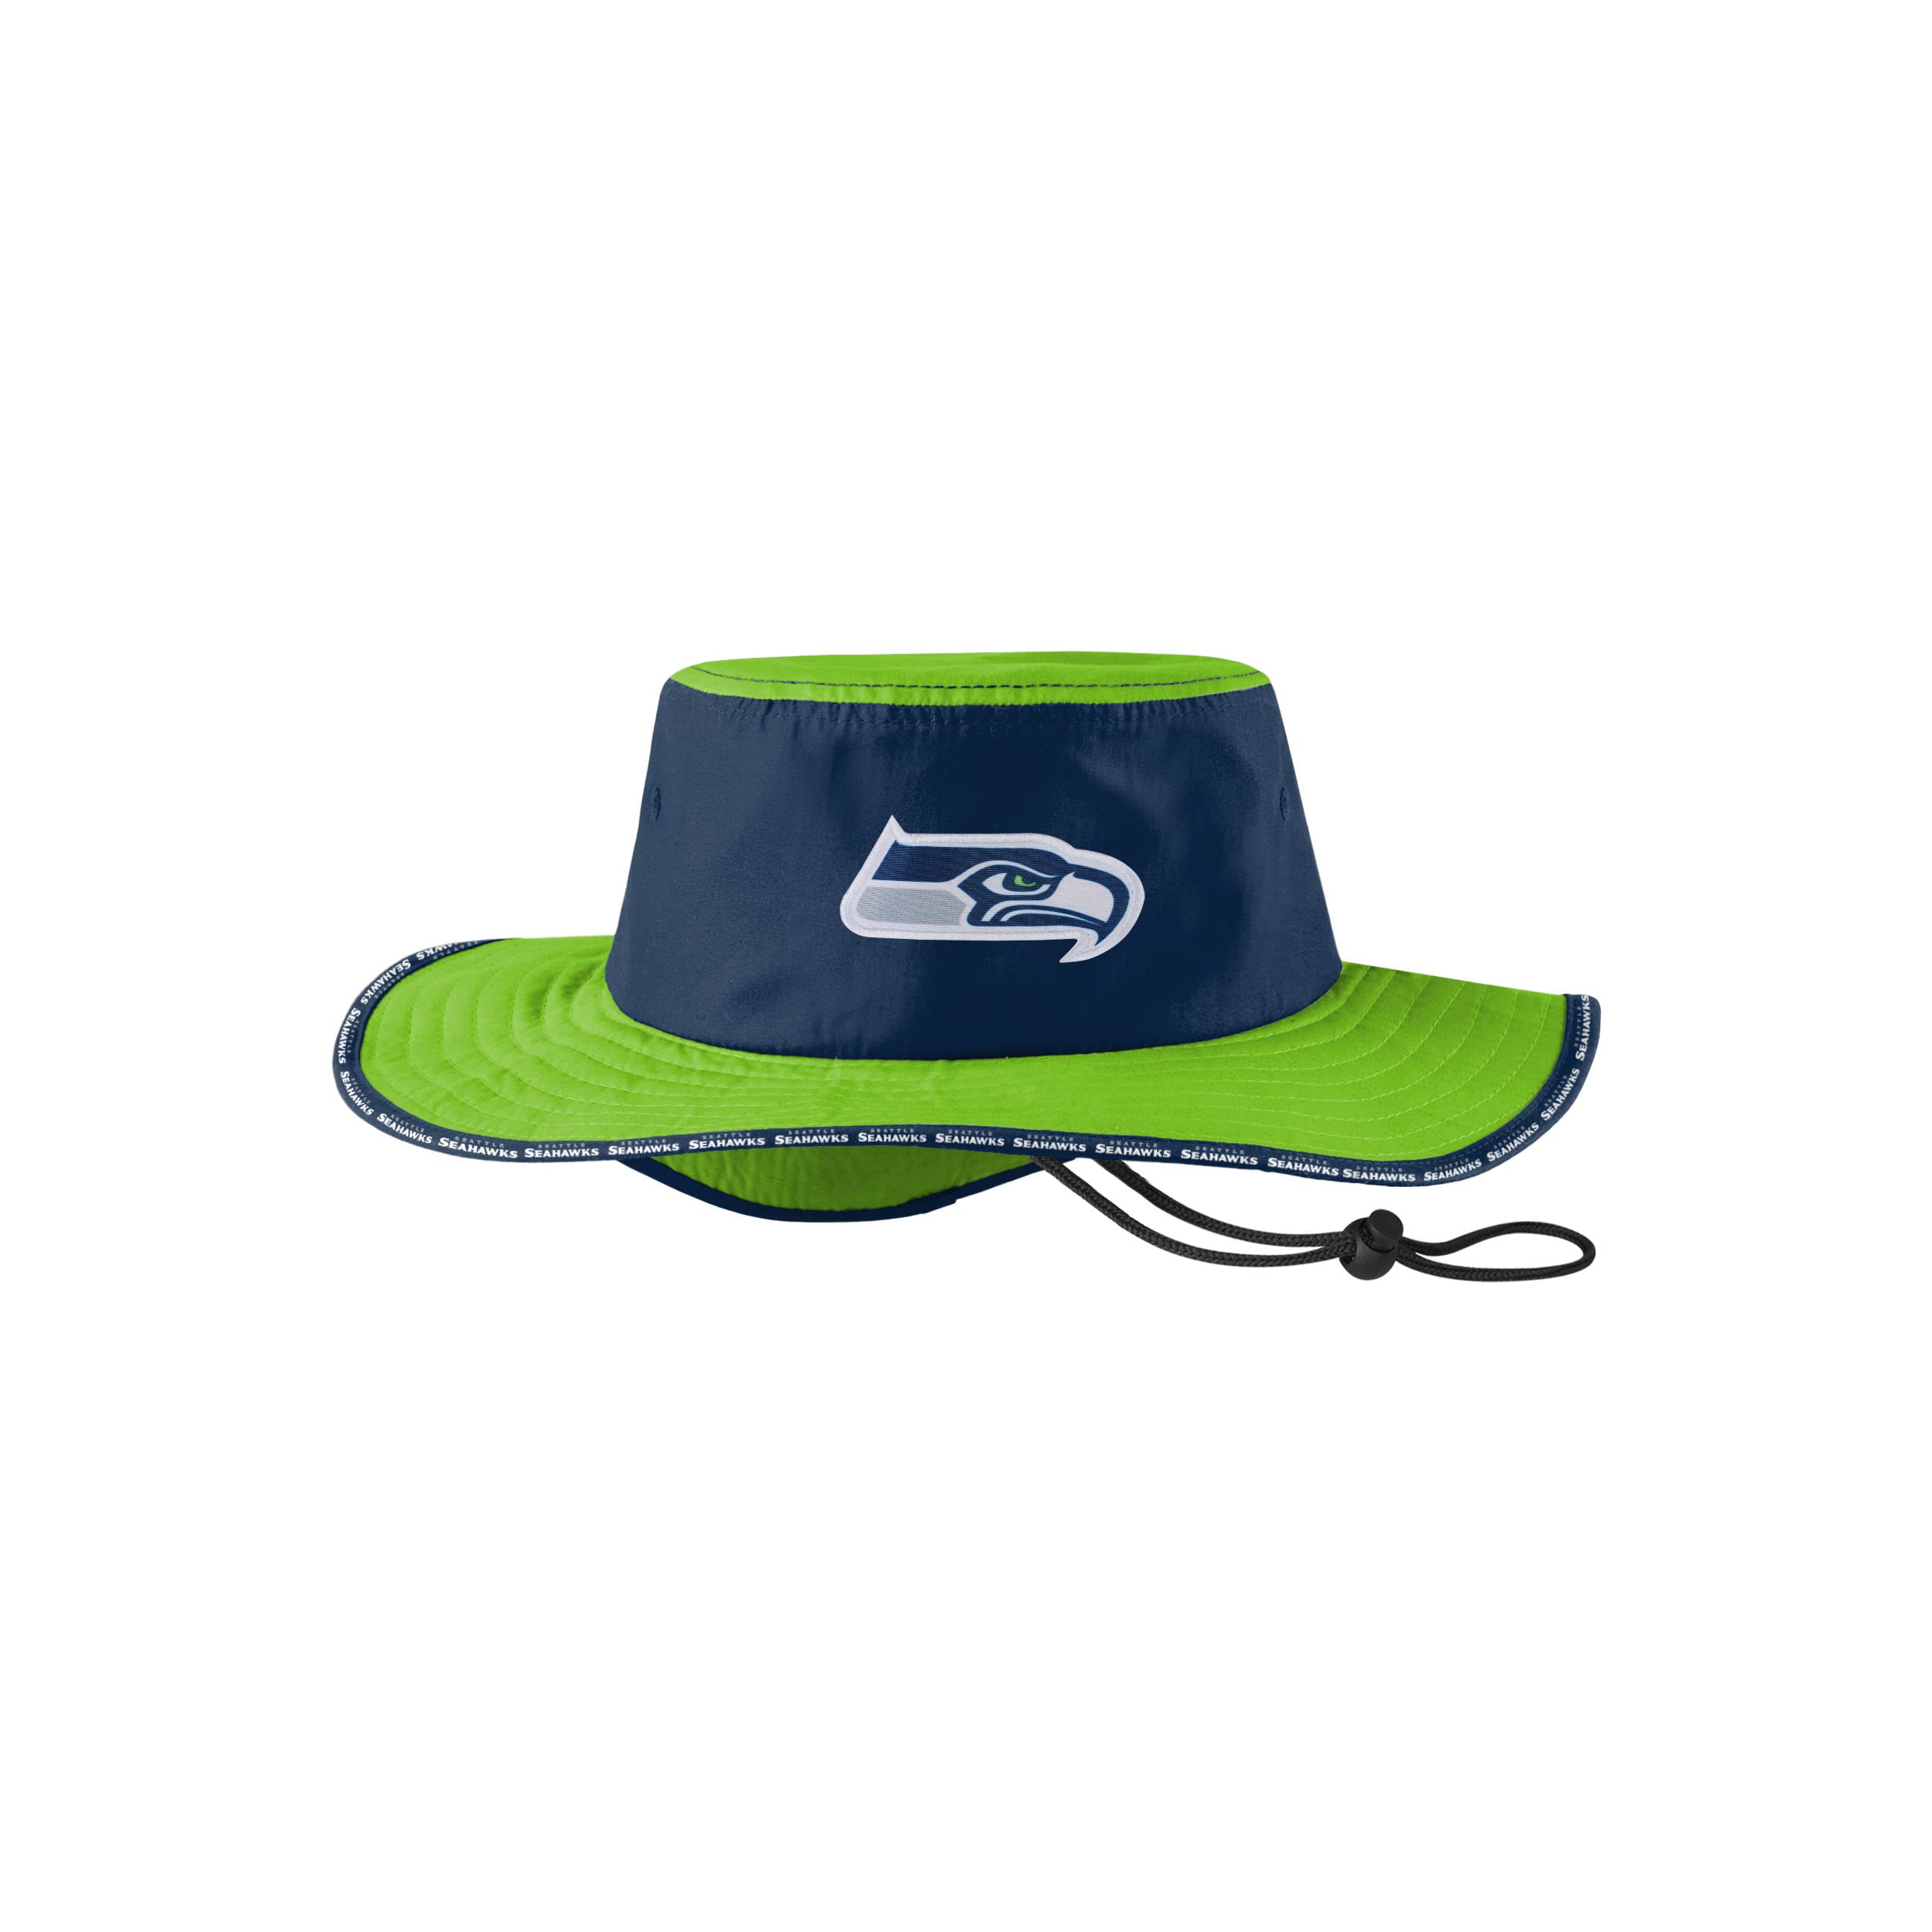 Seattle Seahawks official hat